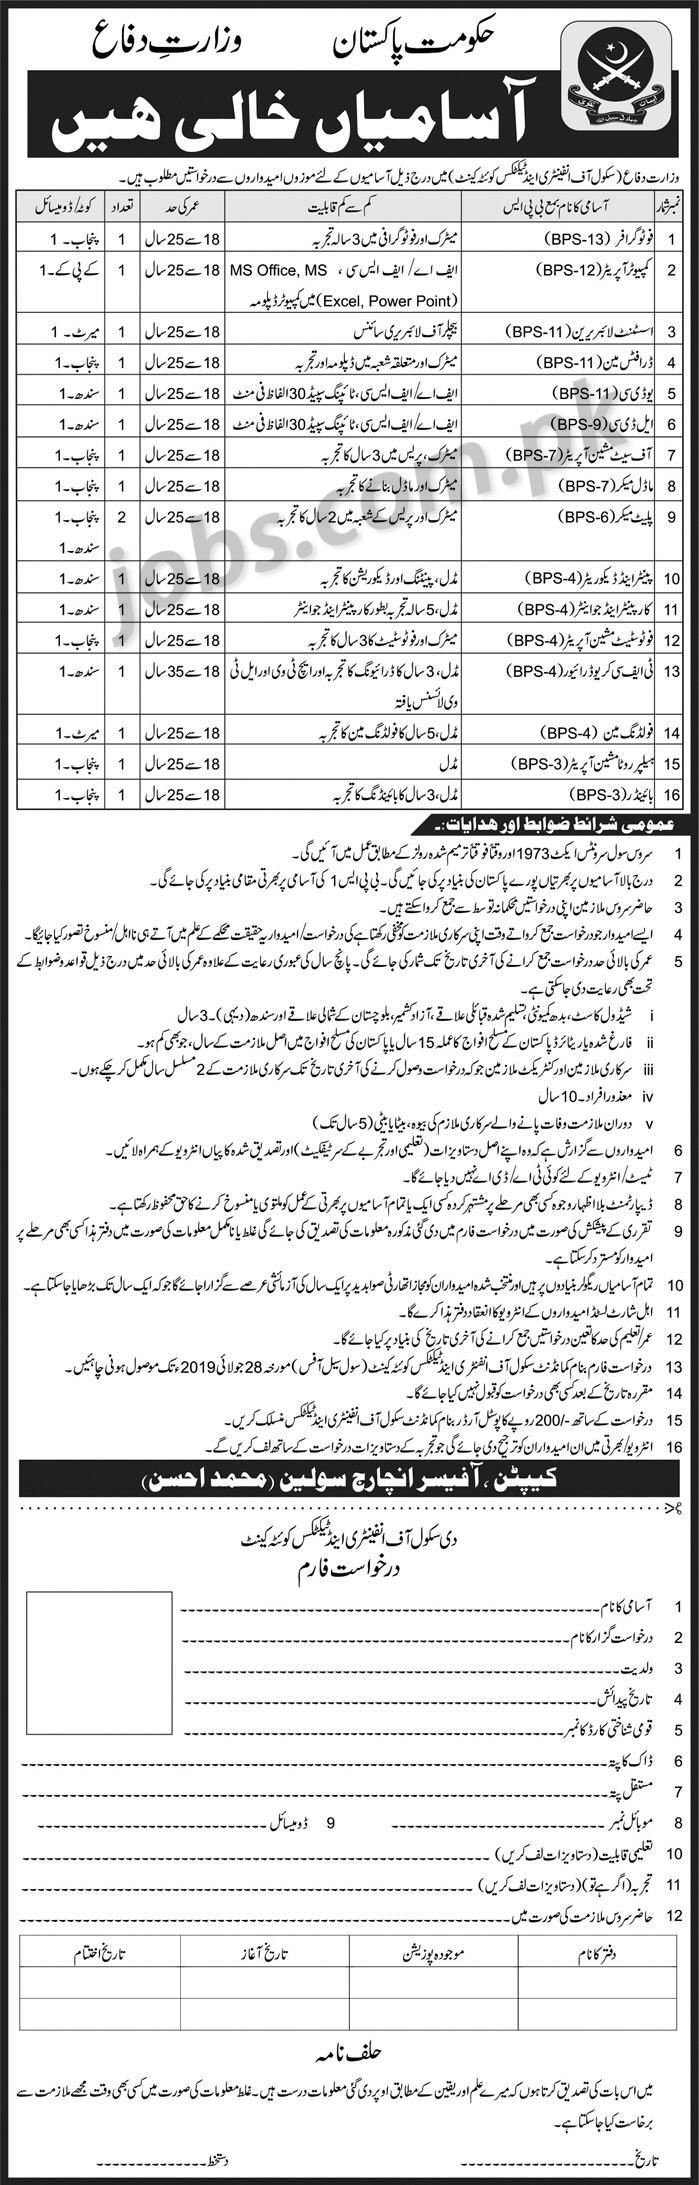 Ministry Of Defence Jobs 2019 For Graduates, LDC/UDC Clerks, Computer Operator, Photographer & Other